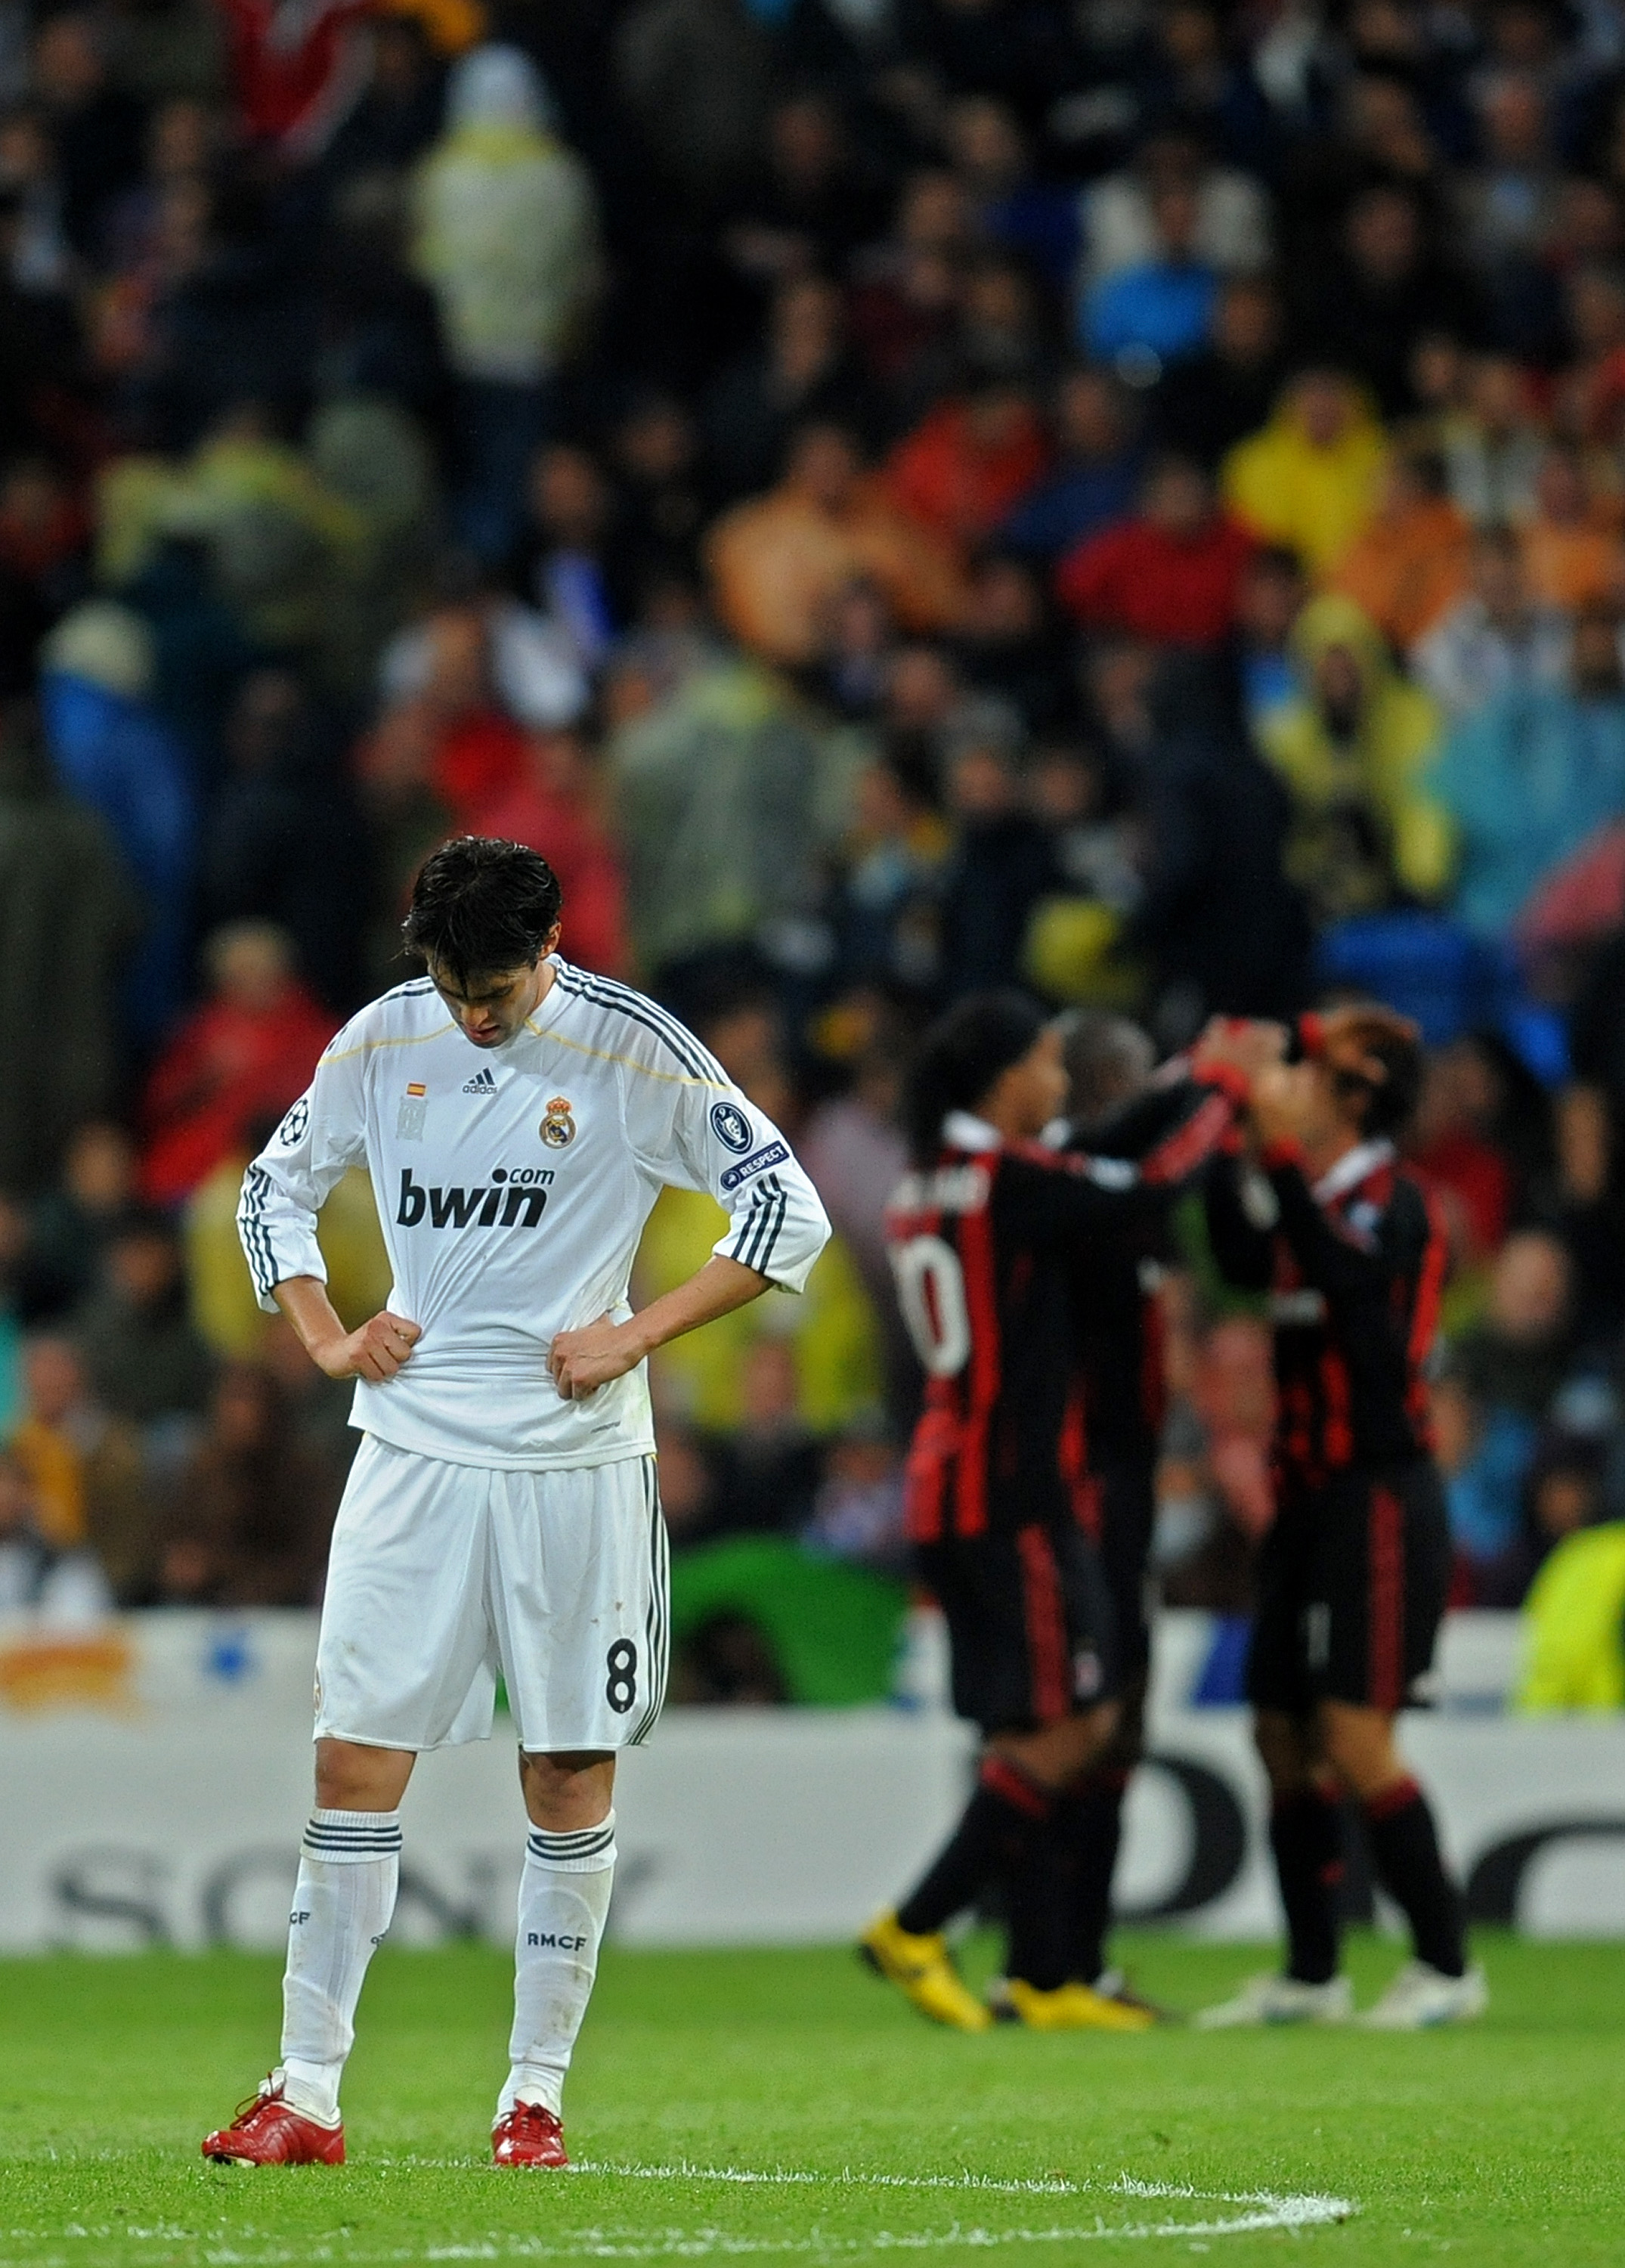 MADRID, SPAIN - OCTOBER 21:  Kaka (L) of Real Madrid stands dejected after conceding a goal as AC Milan players celebrate in the background during the Champions League group C match between Real Madrid and AC Milan at the Estadio Santiago Bernabeu on Octo